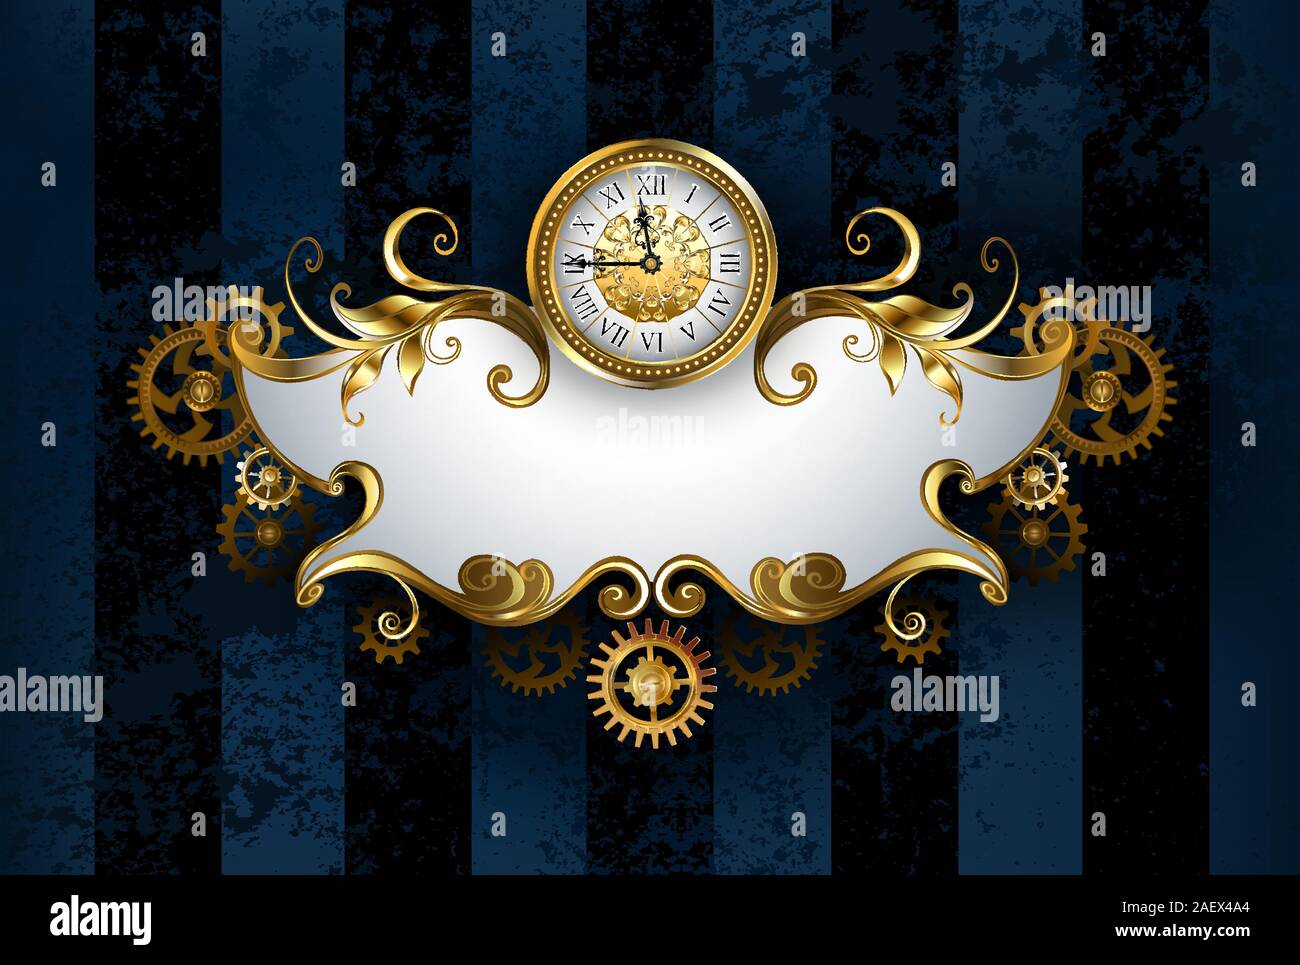 Jewelry, patterned banner with antique watches, decorated with gold and brass gears on dark blue, textured, striped background, drawn in steampunk sty Stock Vector